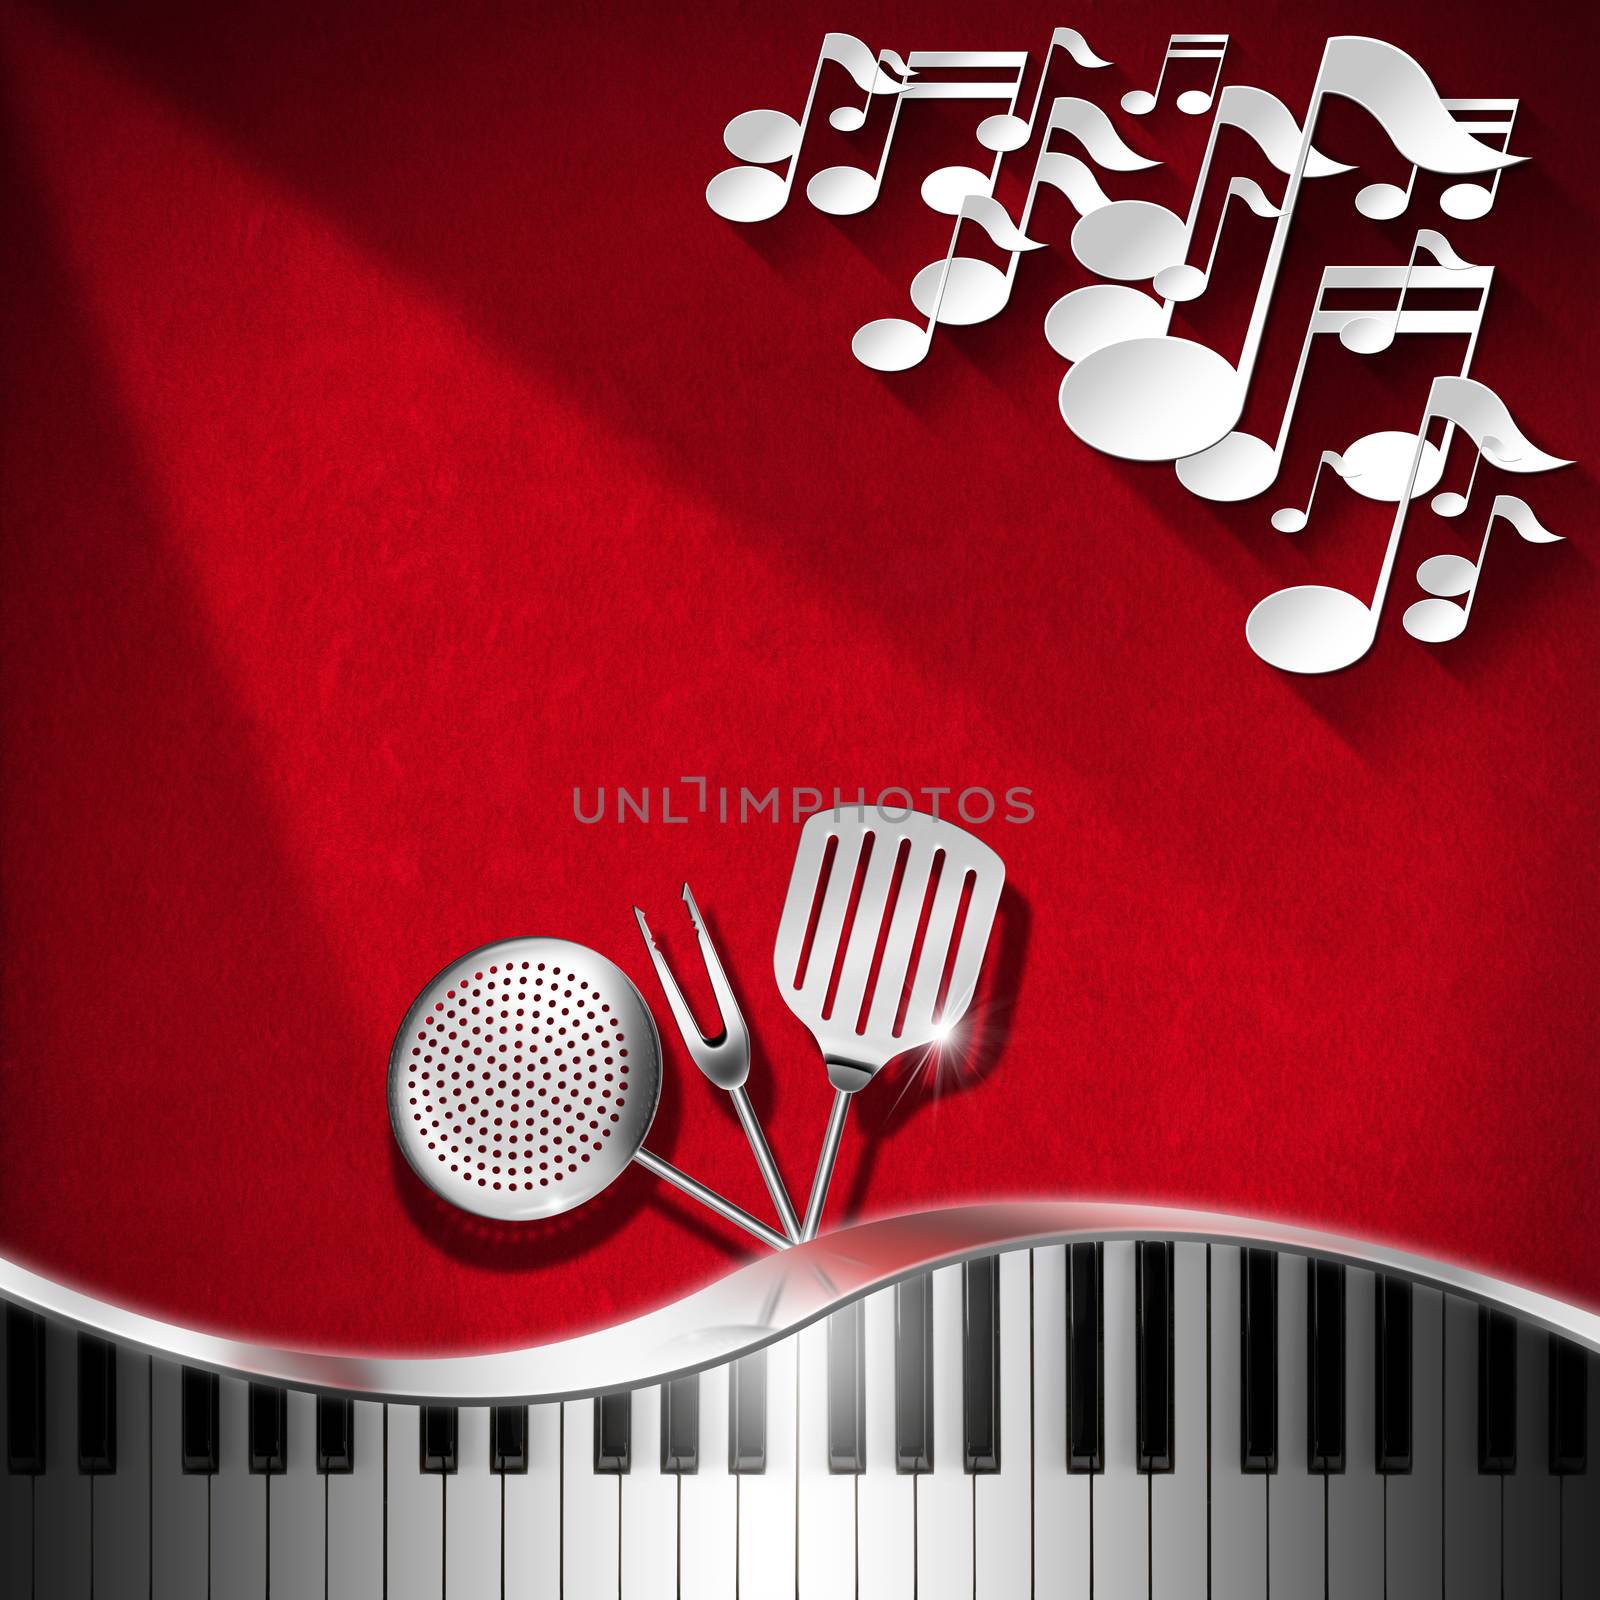 Red velvet background with kitchen utensils, white musical notes and piano keyboard. Template for food menu and a musical event